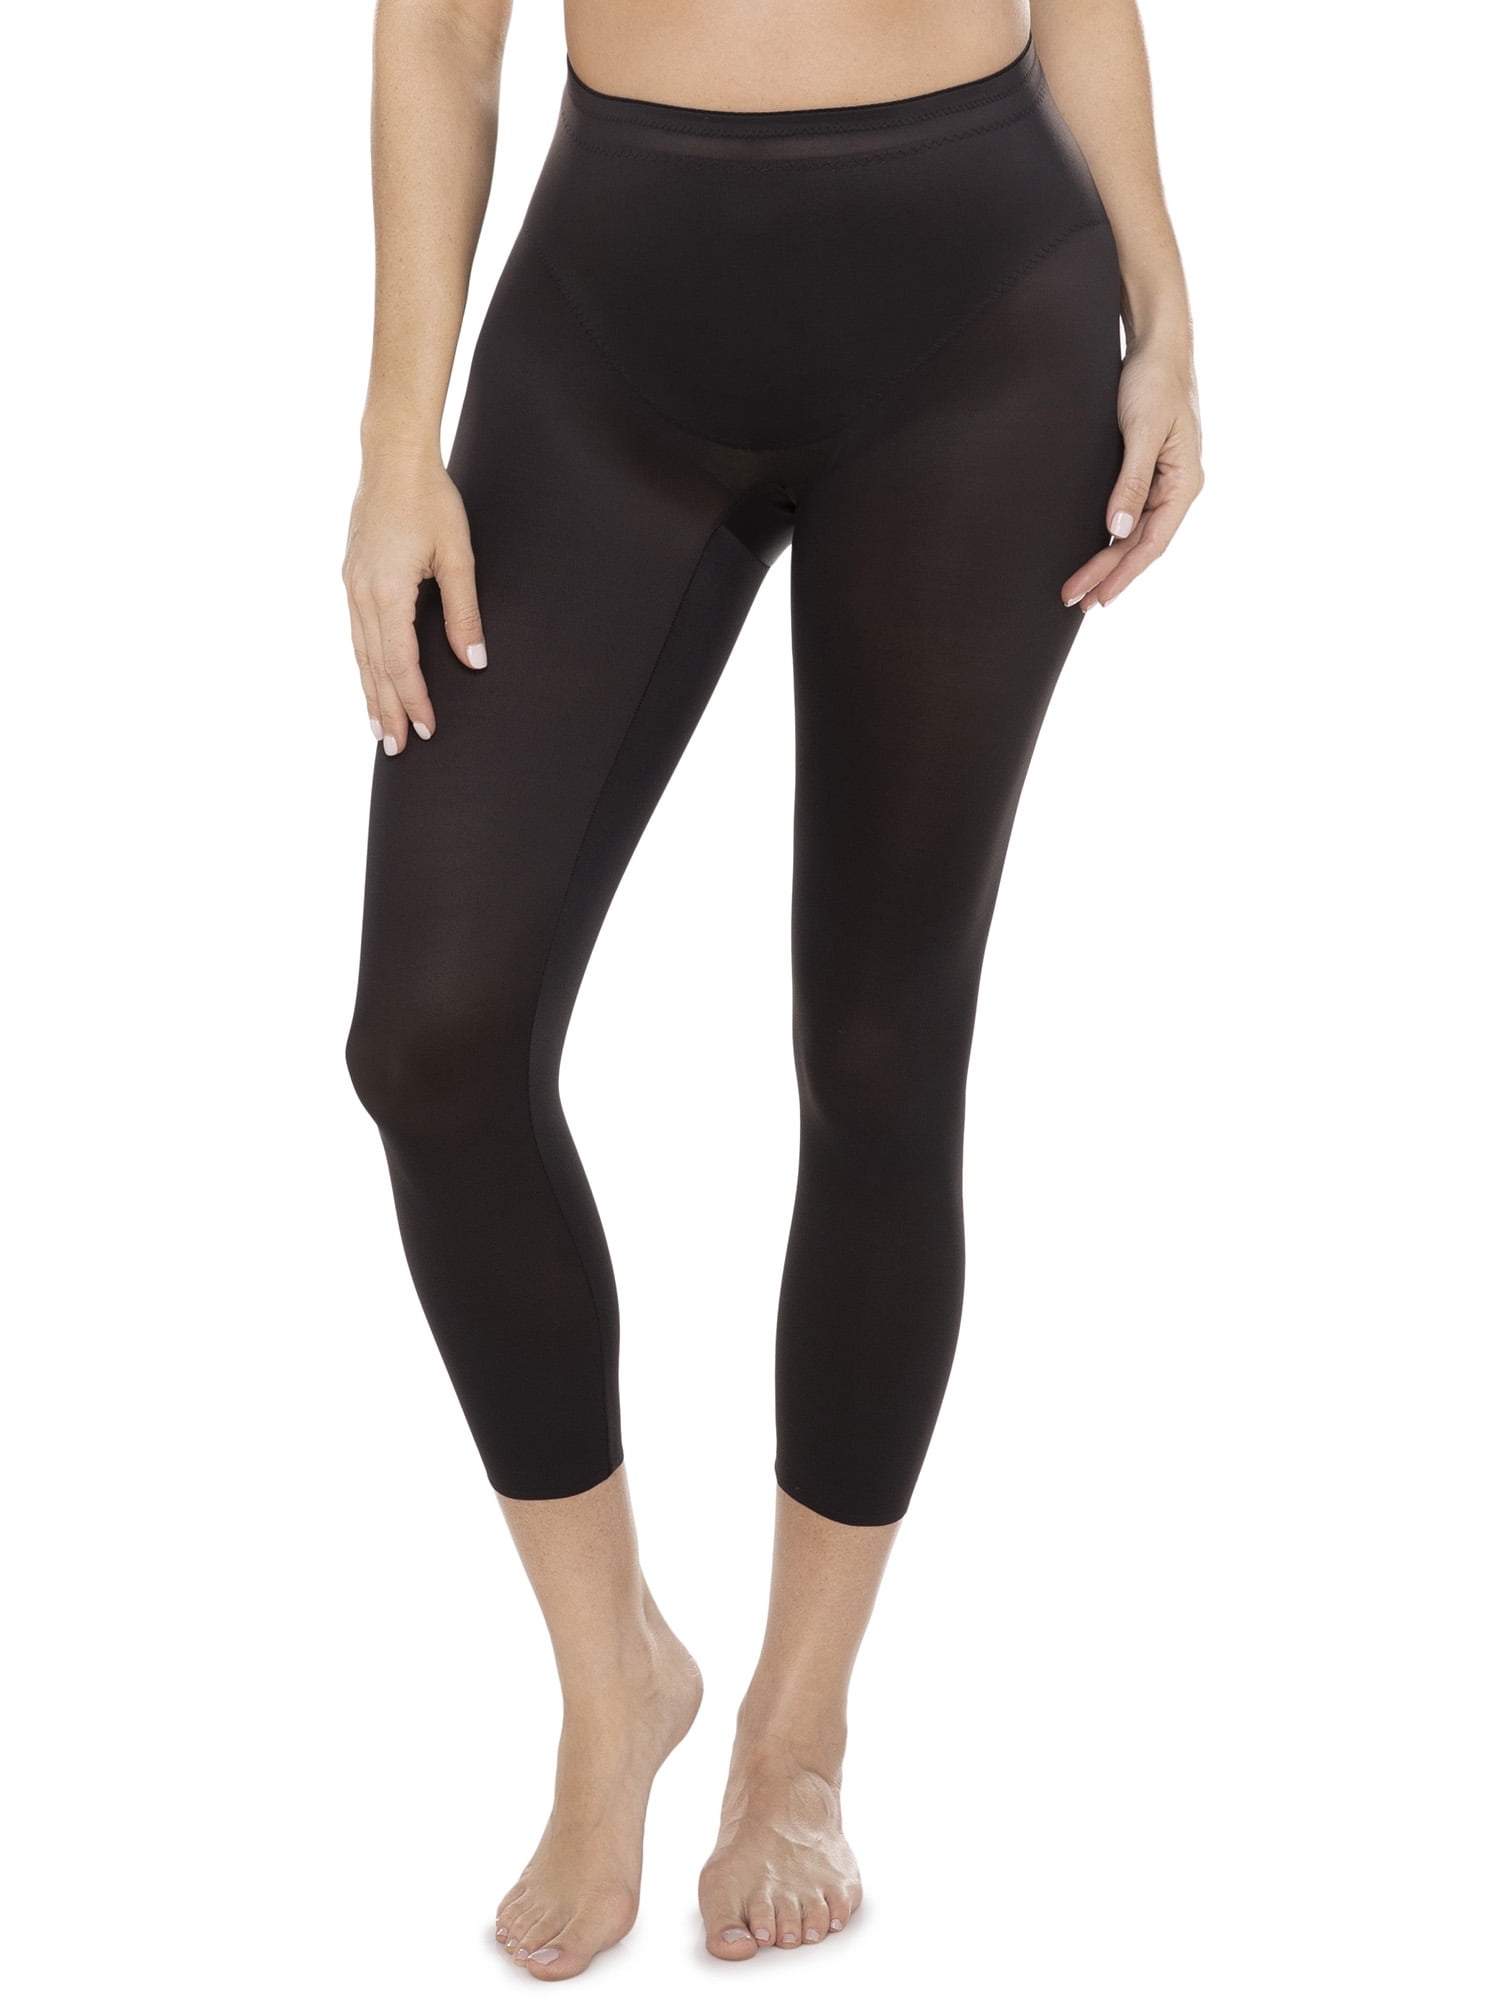 Miraclesuit Womens Flexible Fit Extra-Firm Shaping Pantliner Style-2902